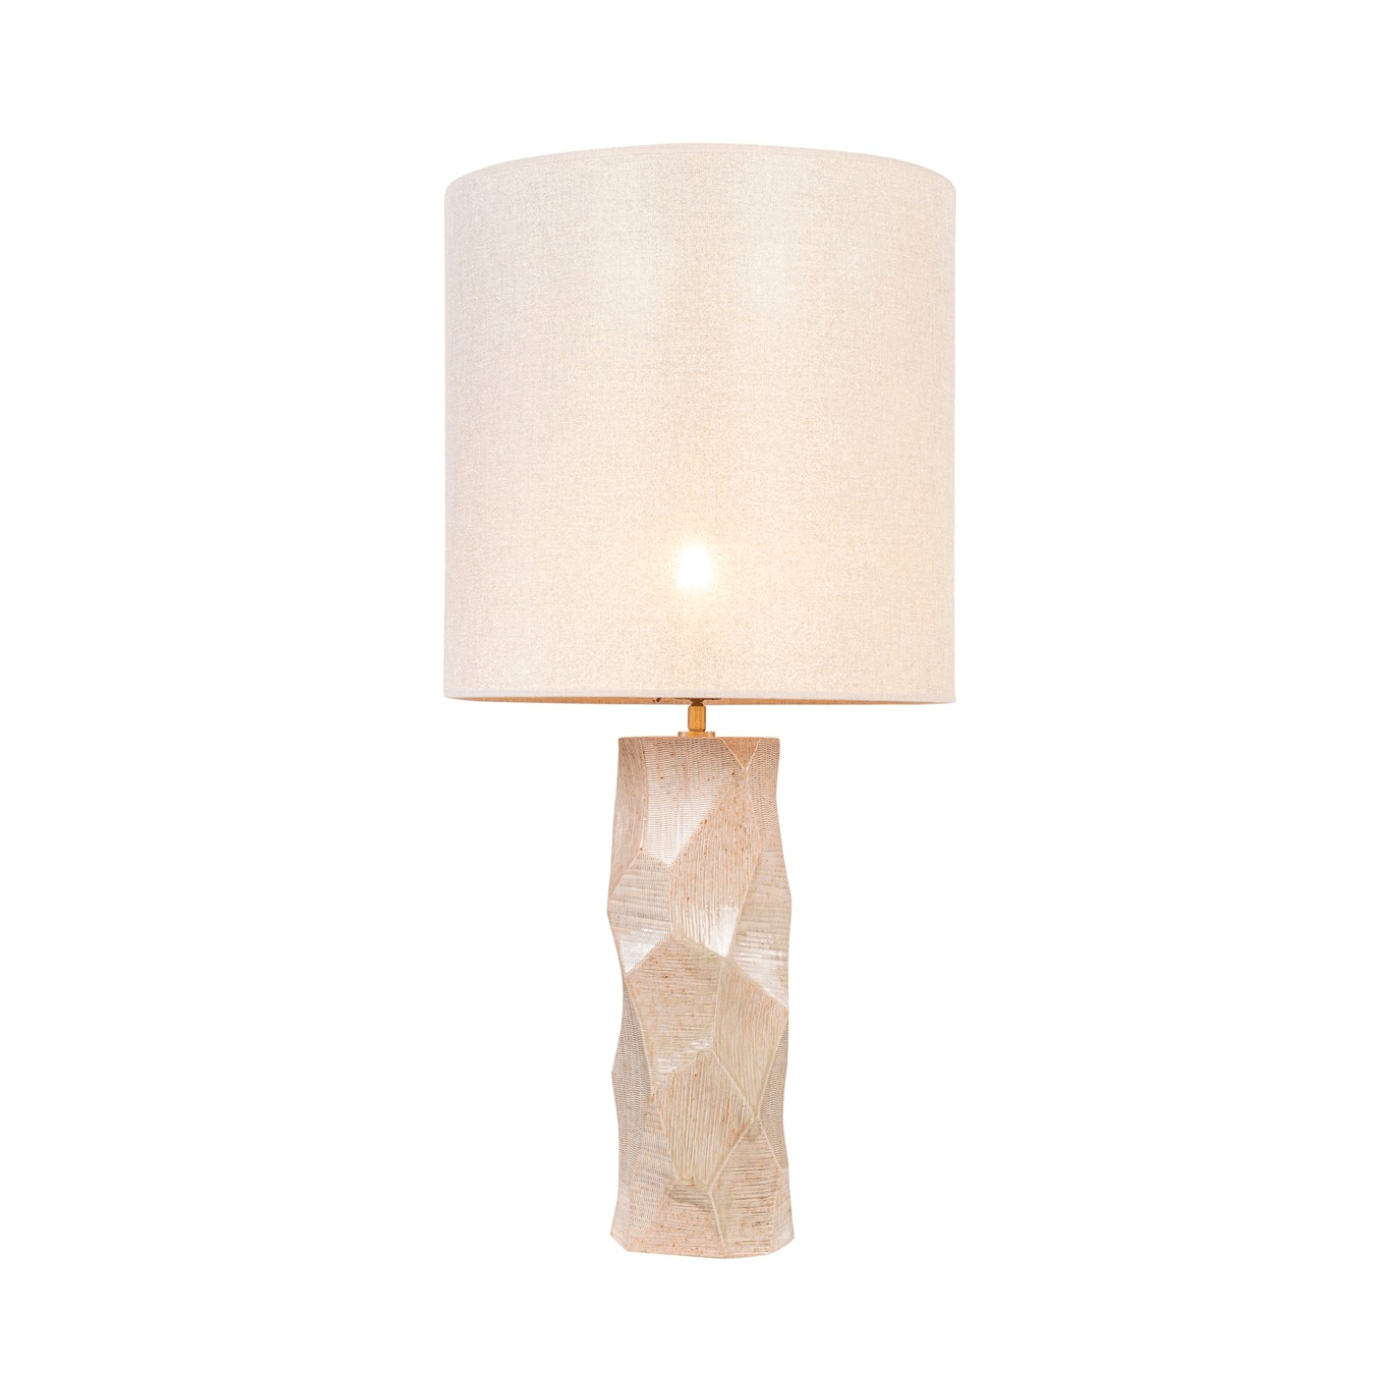 Abstract Pastel Earthenware Table Lamp with Shade - Maison Rêves UK